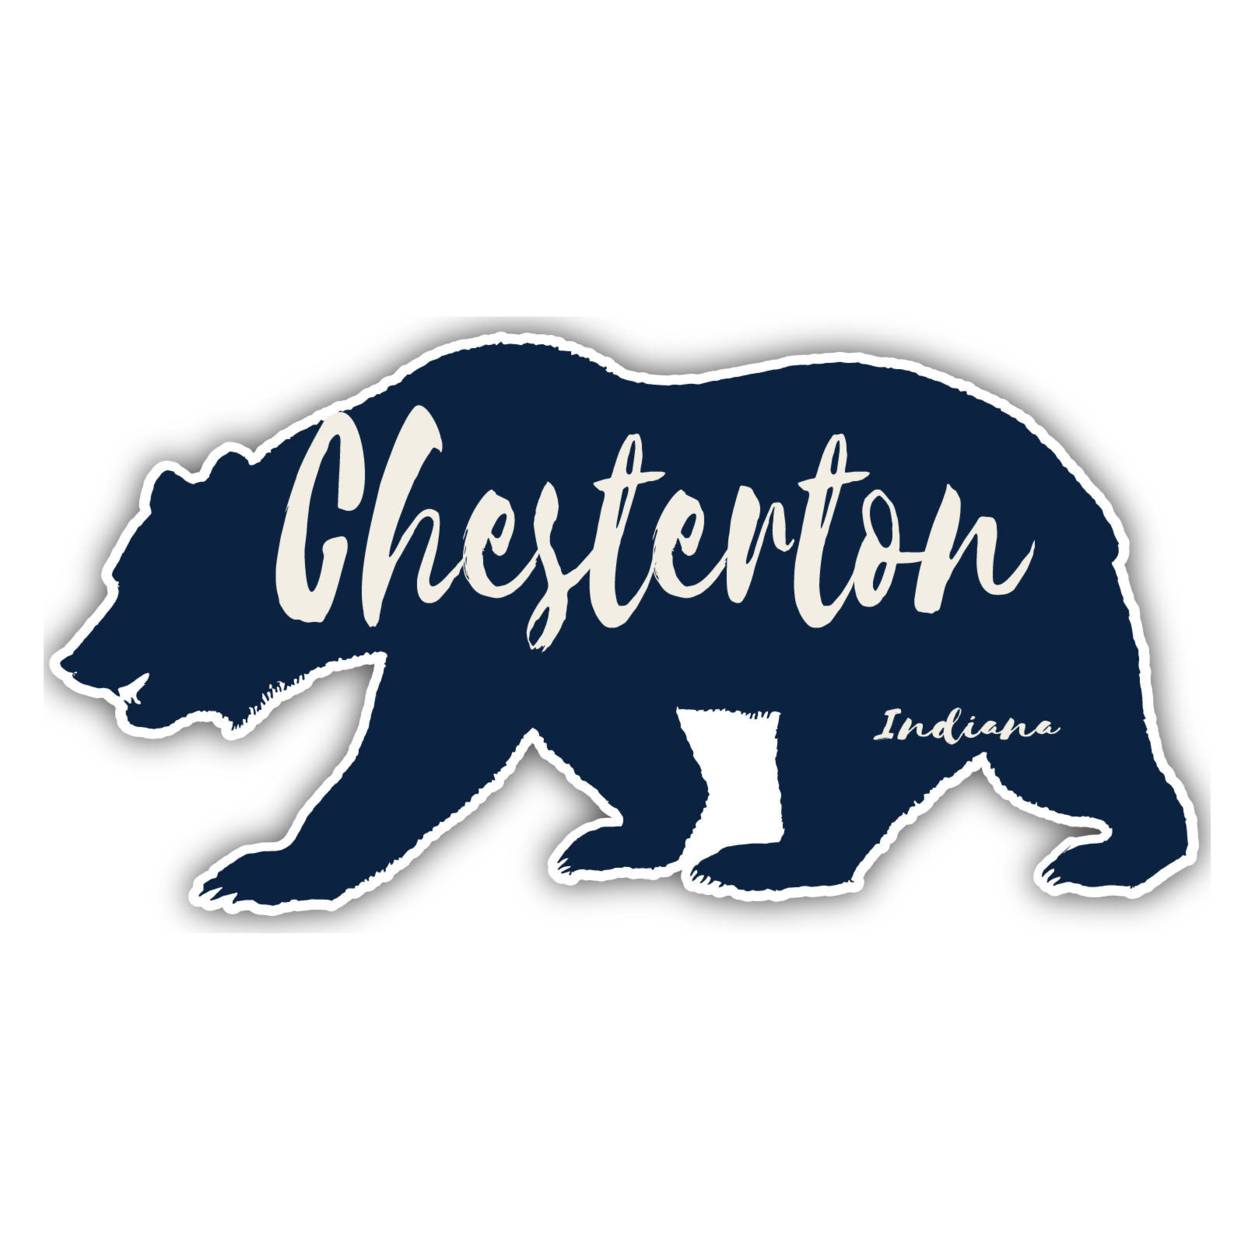 Chesterton Indiana Souvenir Decorative Stickers (Choose Theme And Size) - 4-Pack, 8-Inch, Bear